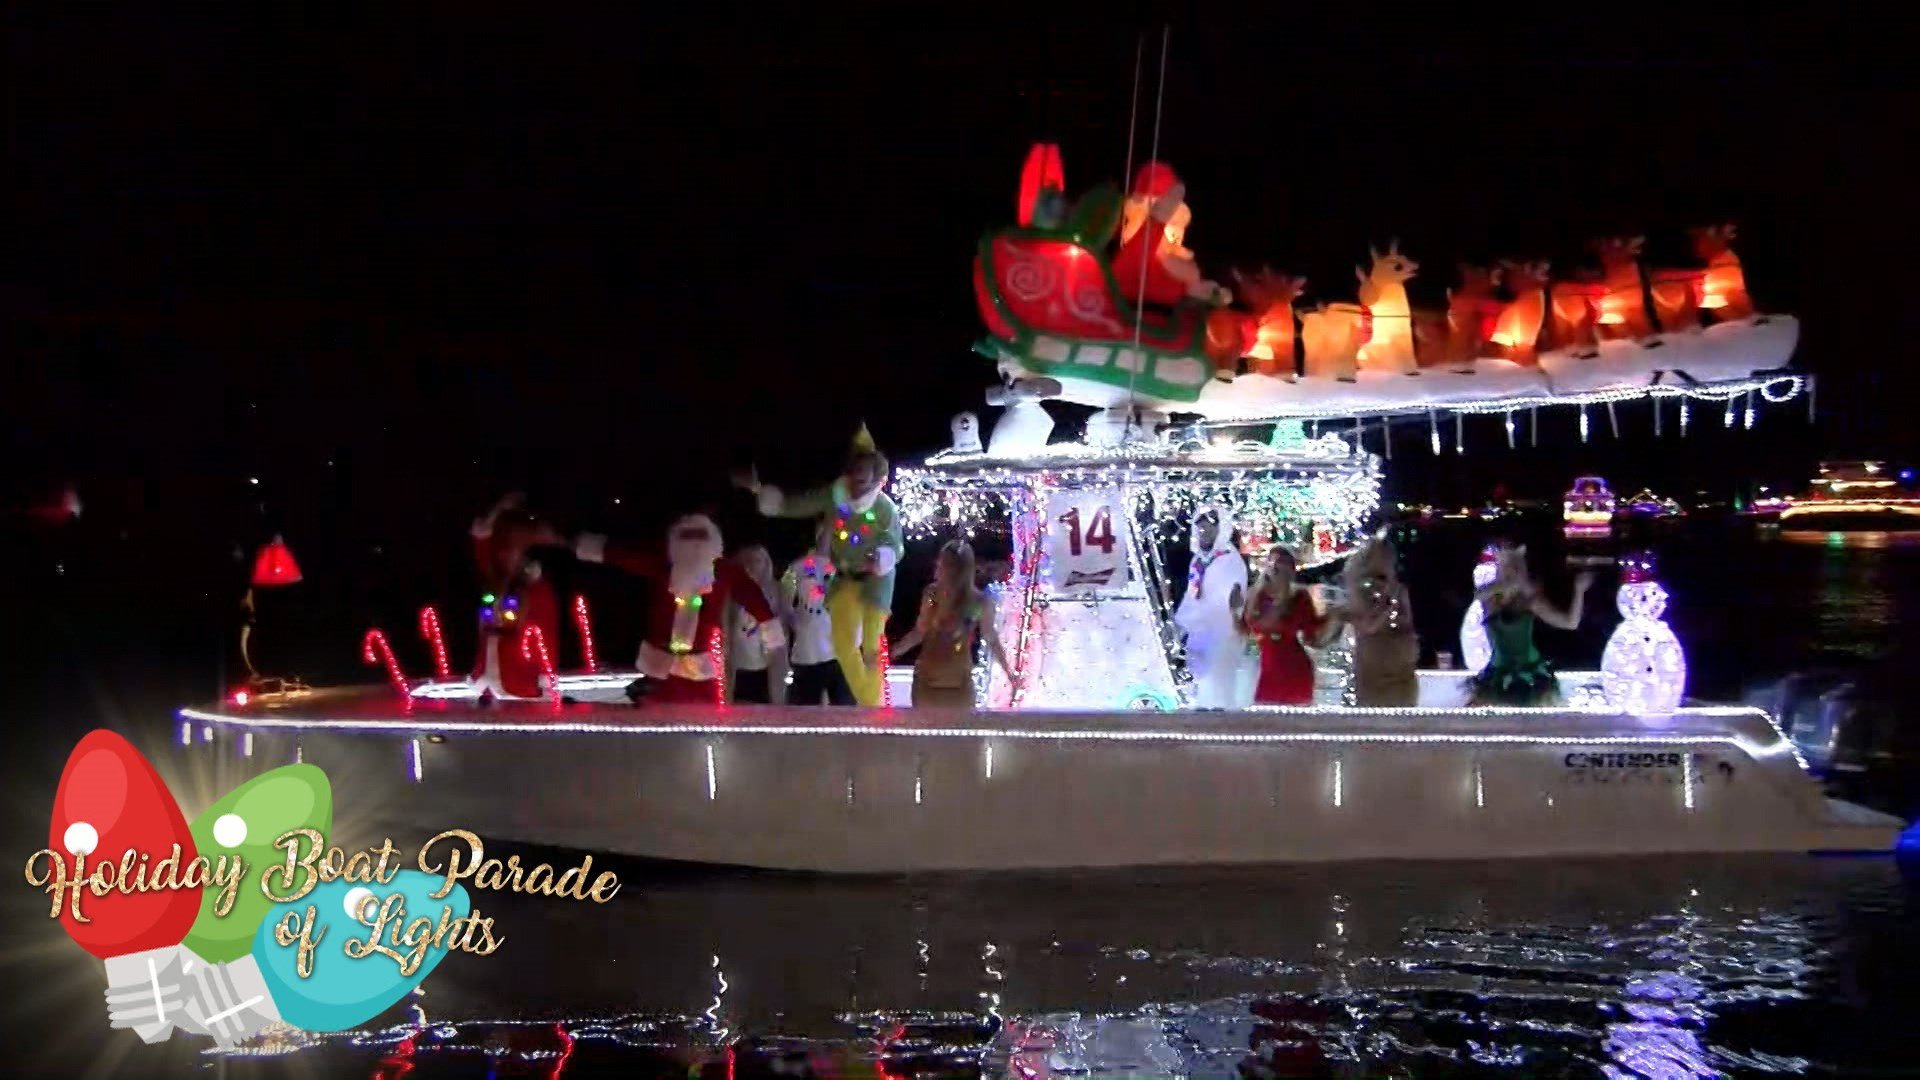 Annual Holiday Boat Parade Of Lights Draws In Crowd of Hundreds